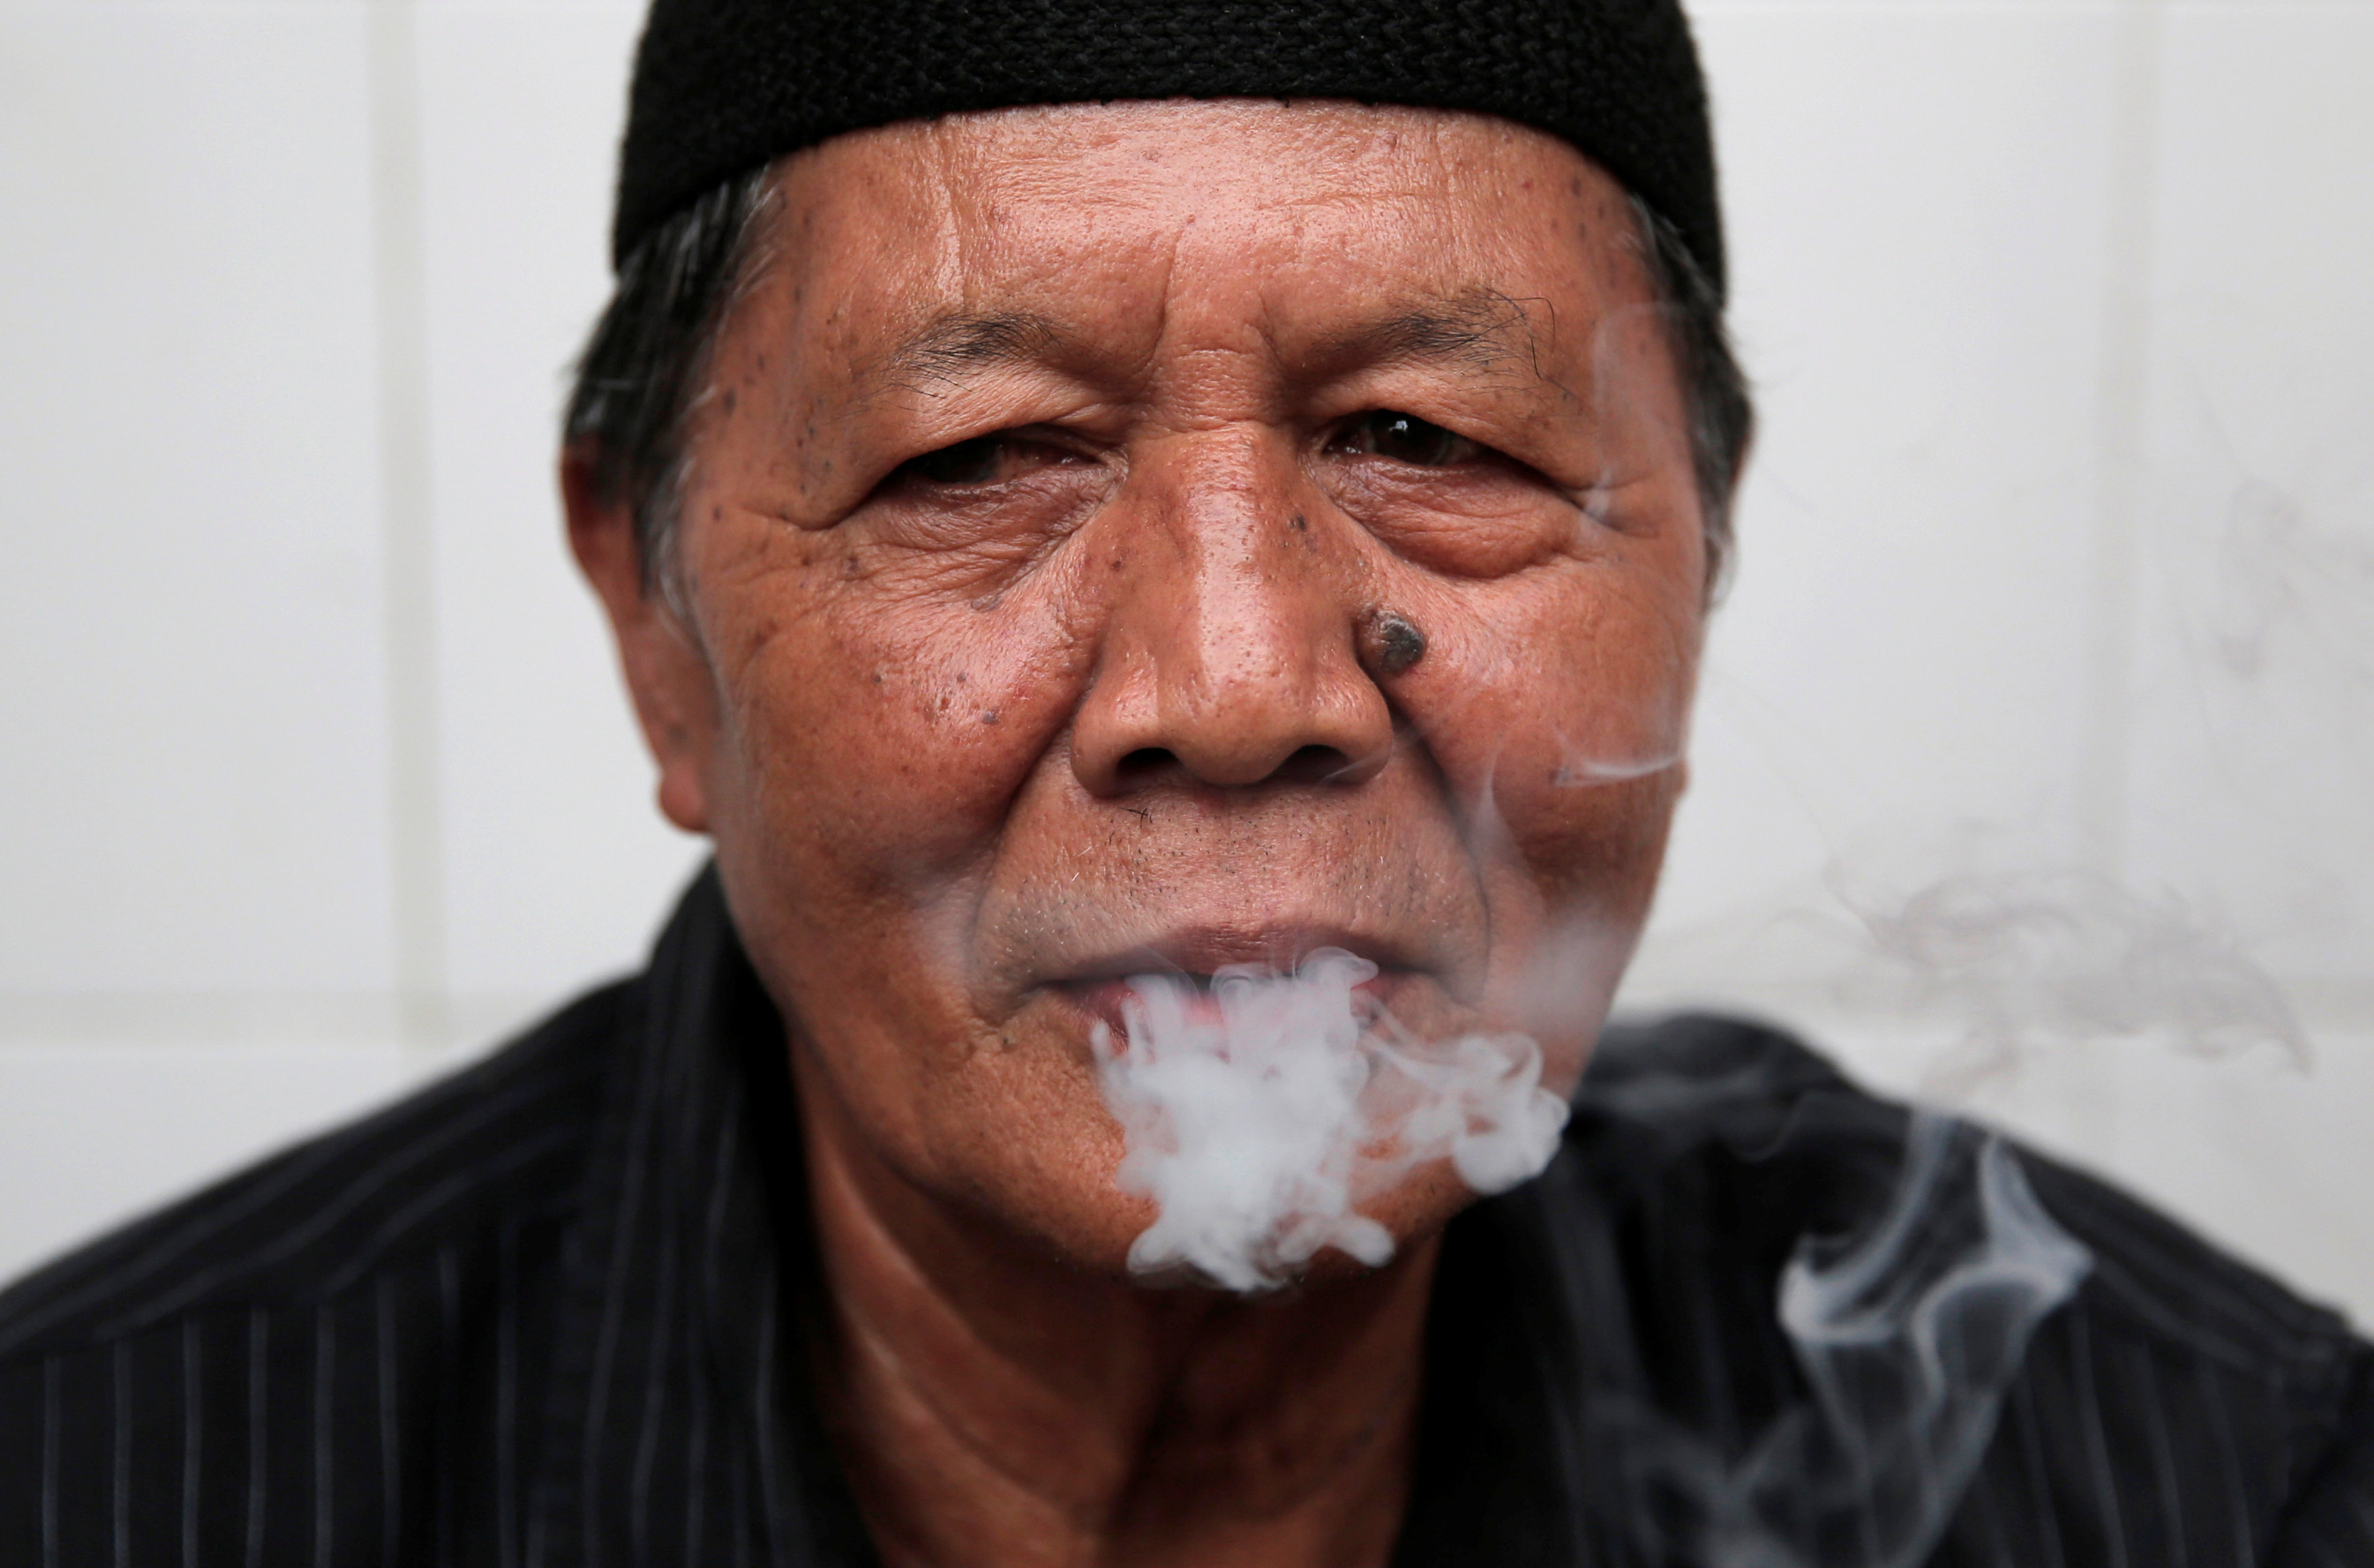 A man smokes s cigarette in Jakarta, Indonesia, March 14, 2017. Picture taken March 14, 2017. REUTERS/Beawiharta